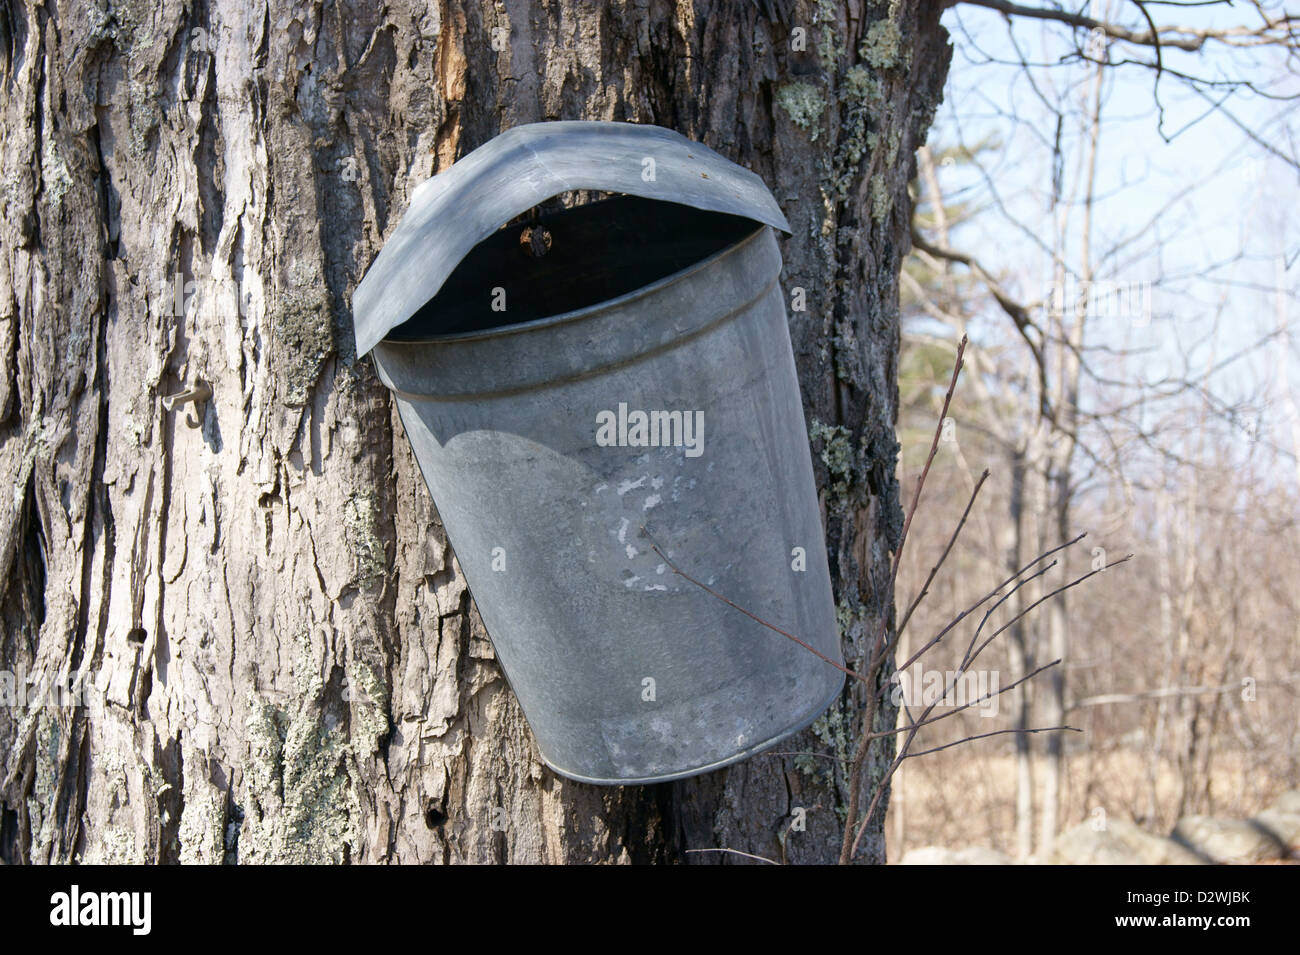 Full-length view of a metal bucket used to collect tree sap to make maple syrup, Maine. Stock Photo